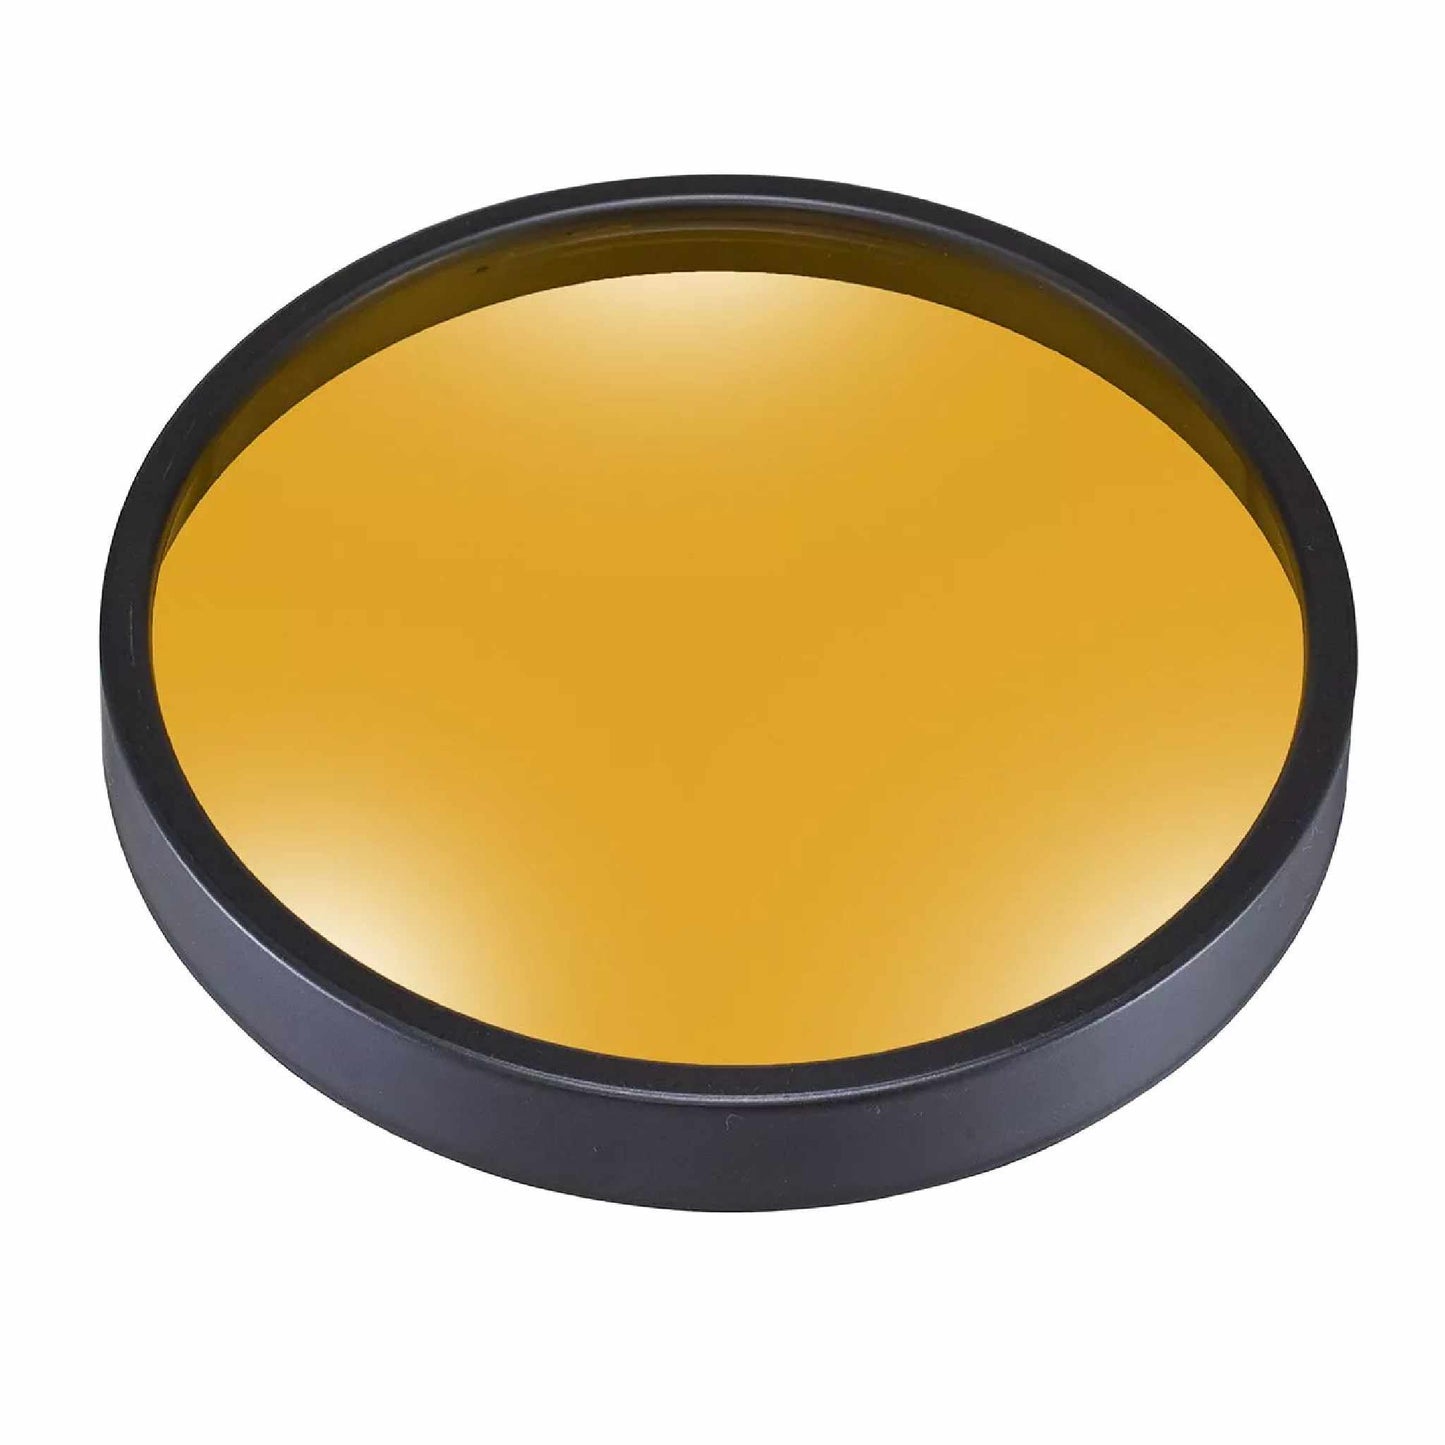 4" Orange Filter Lens for DeepSee MAX Magnified Magnetic Viewer - Flipper